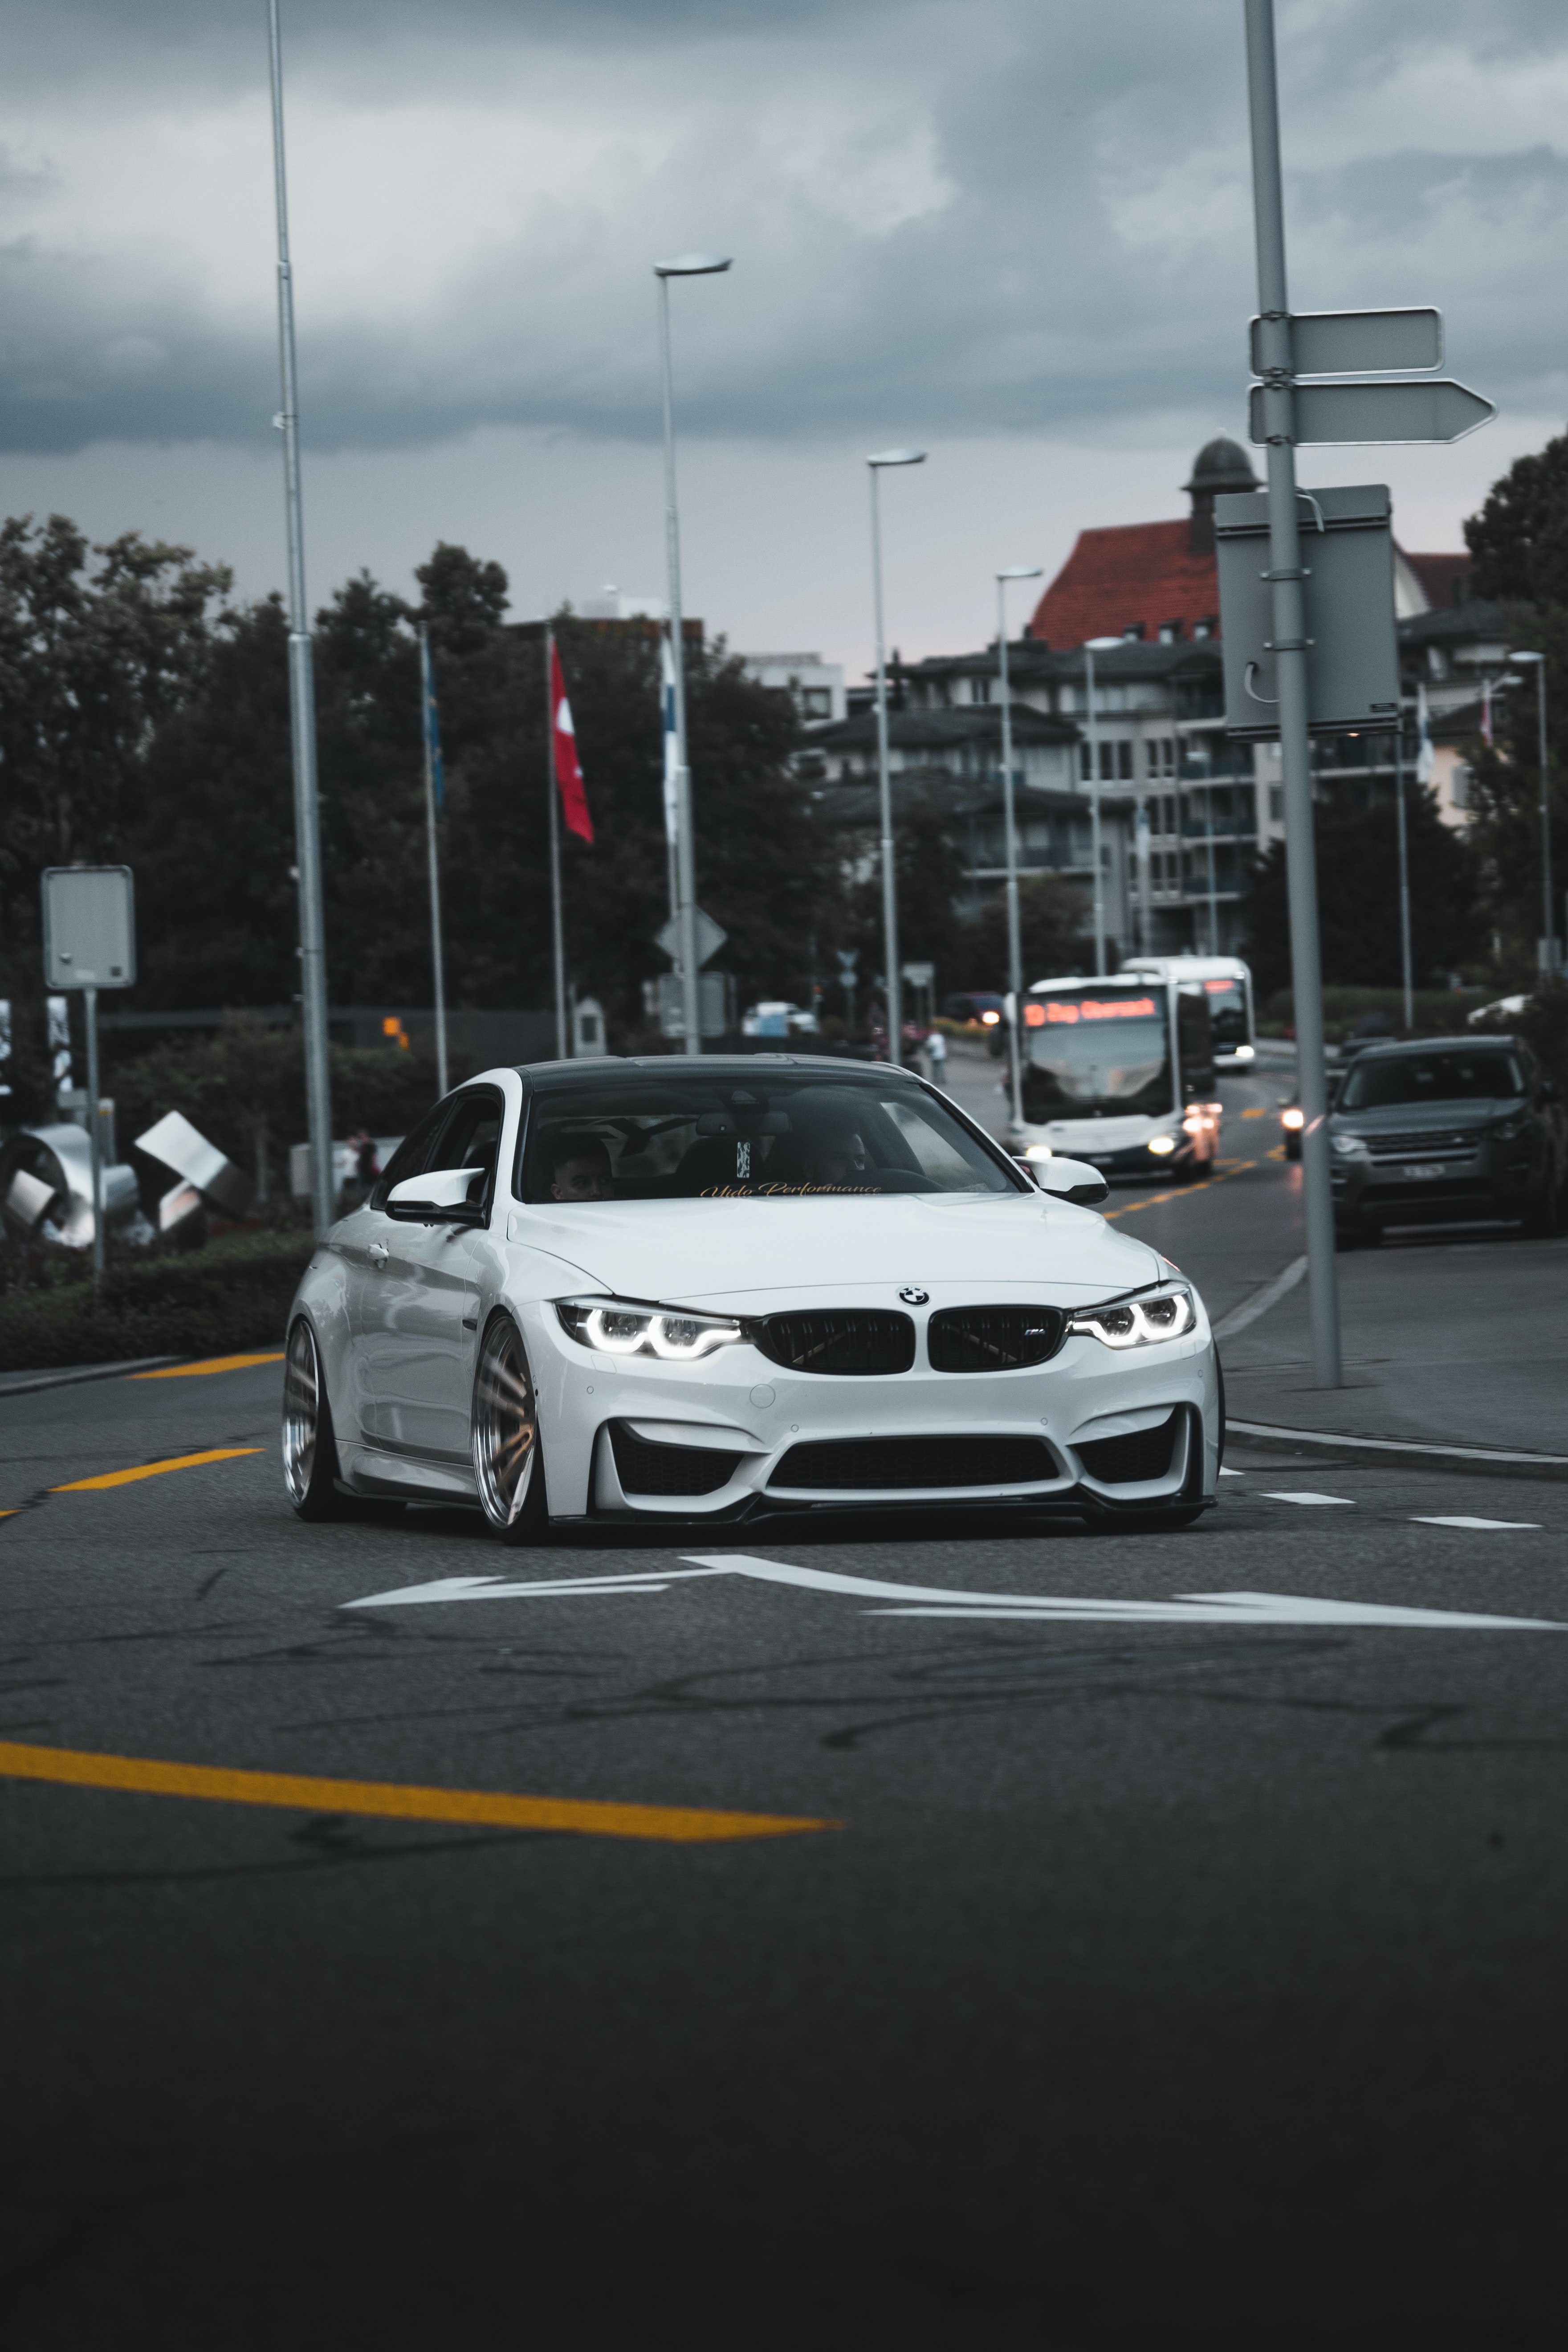 wallpapers front view, bmw, cars, sports, road, car, sports car, bmw 3 series m